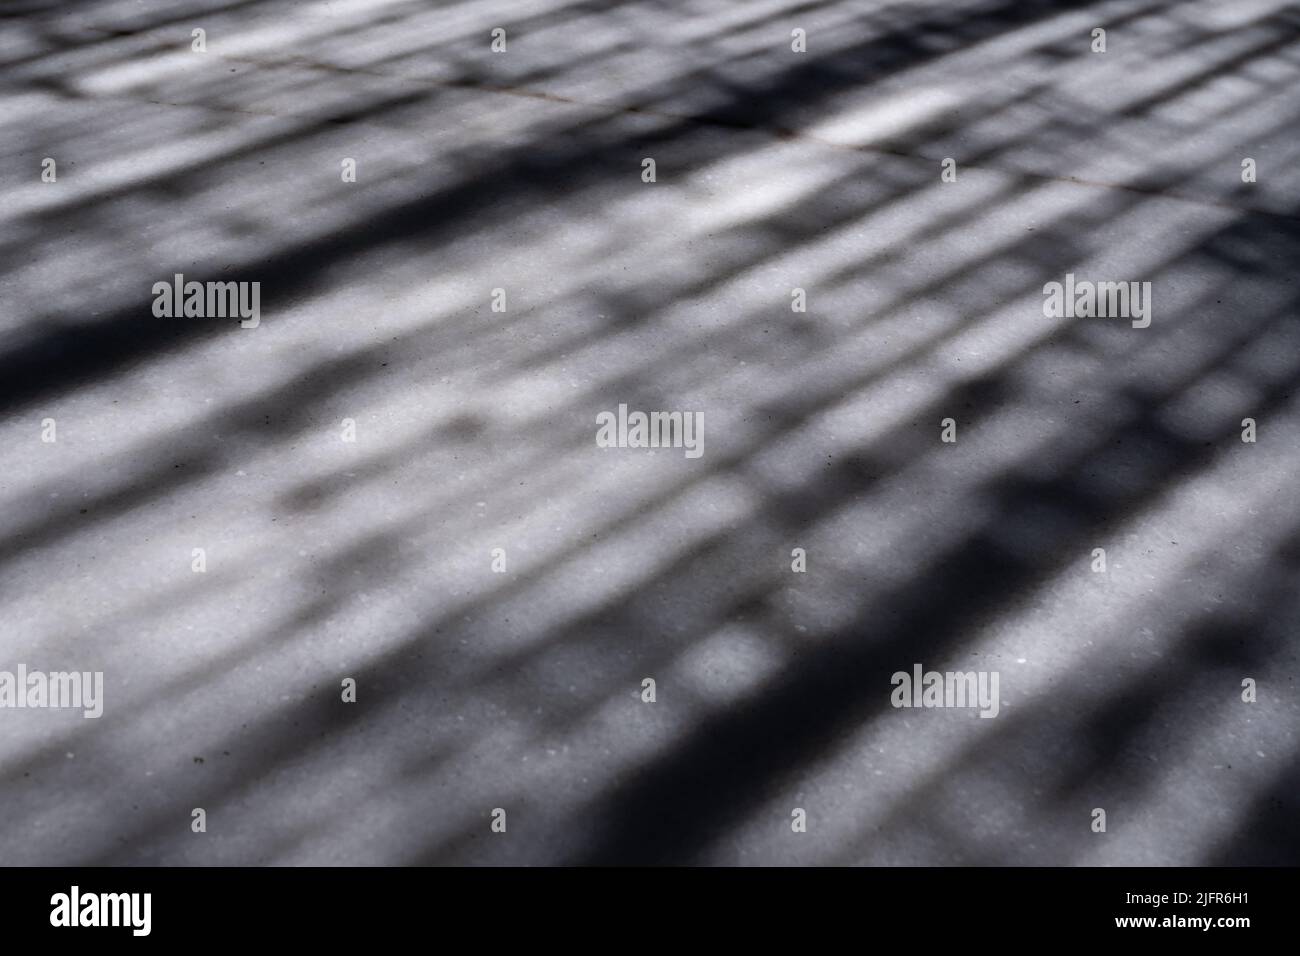 Close-up view of shadows reflected on the white marble surface of a table. Diagonal shadow stripes. Abstract image of a textured surface. Stock Photo